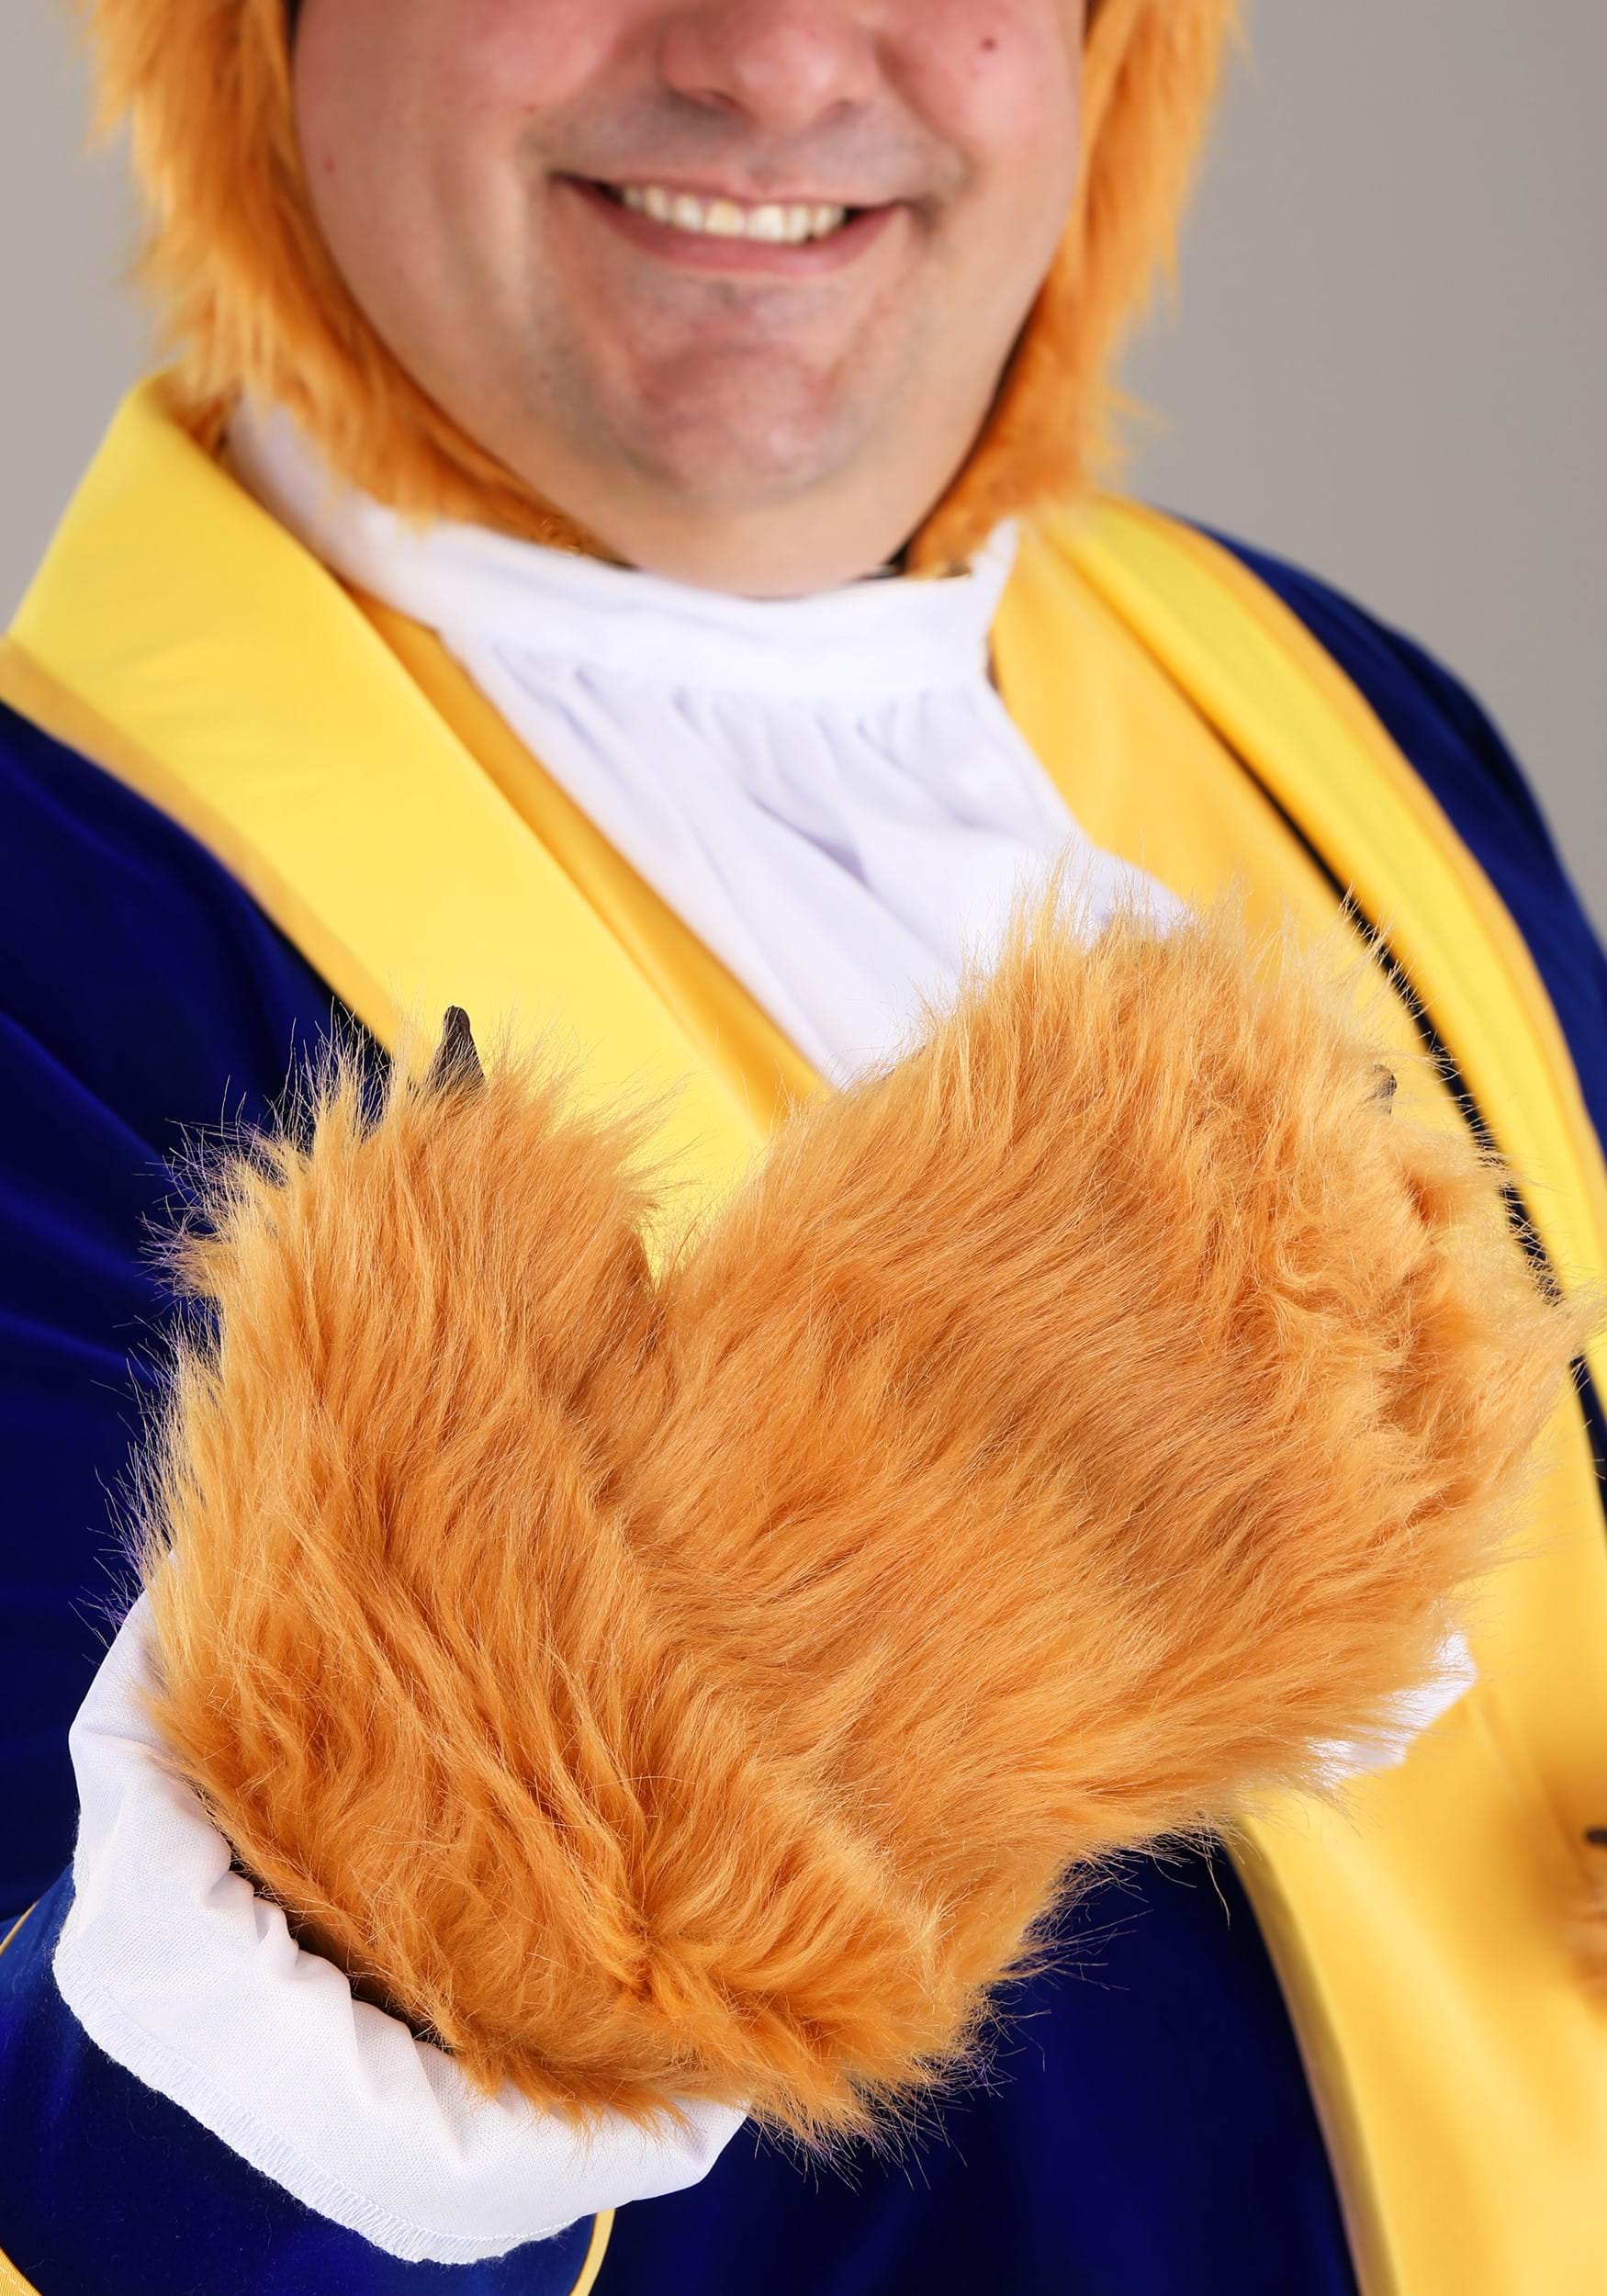 Plus Size Beauty And The Beast Men's Beast Costume